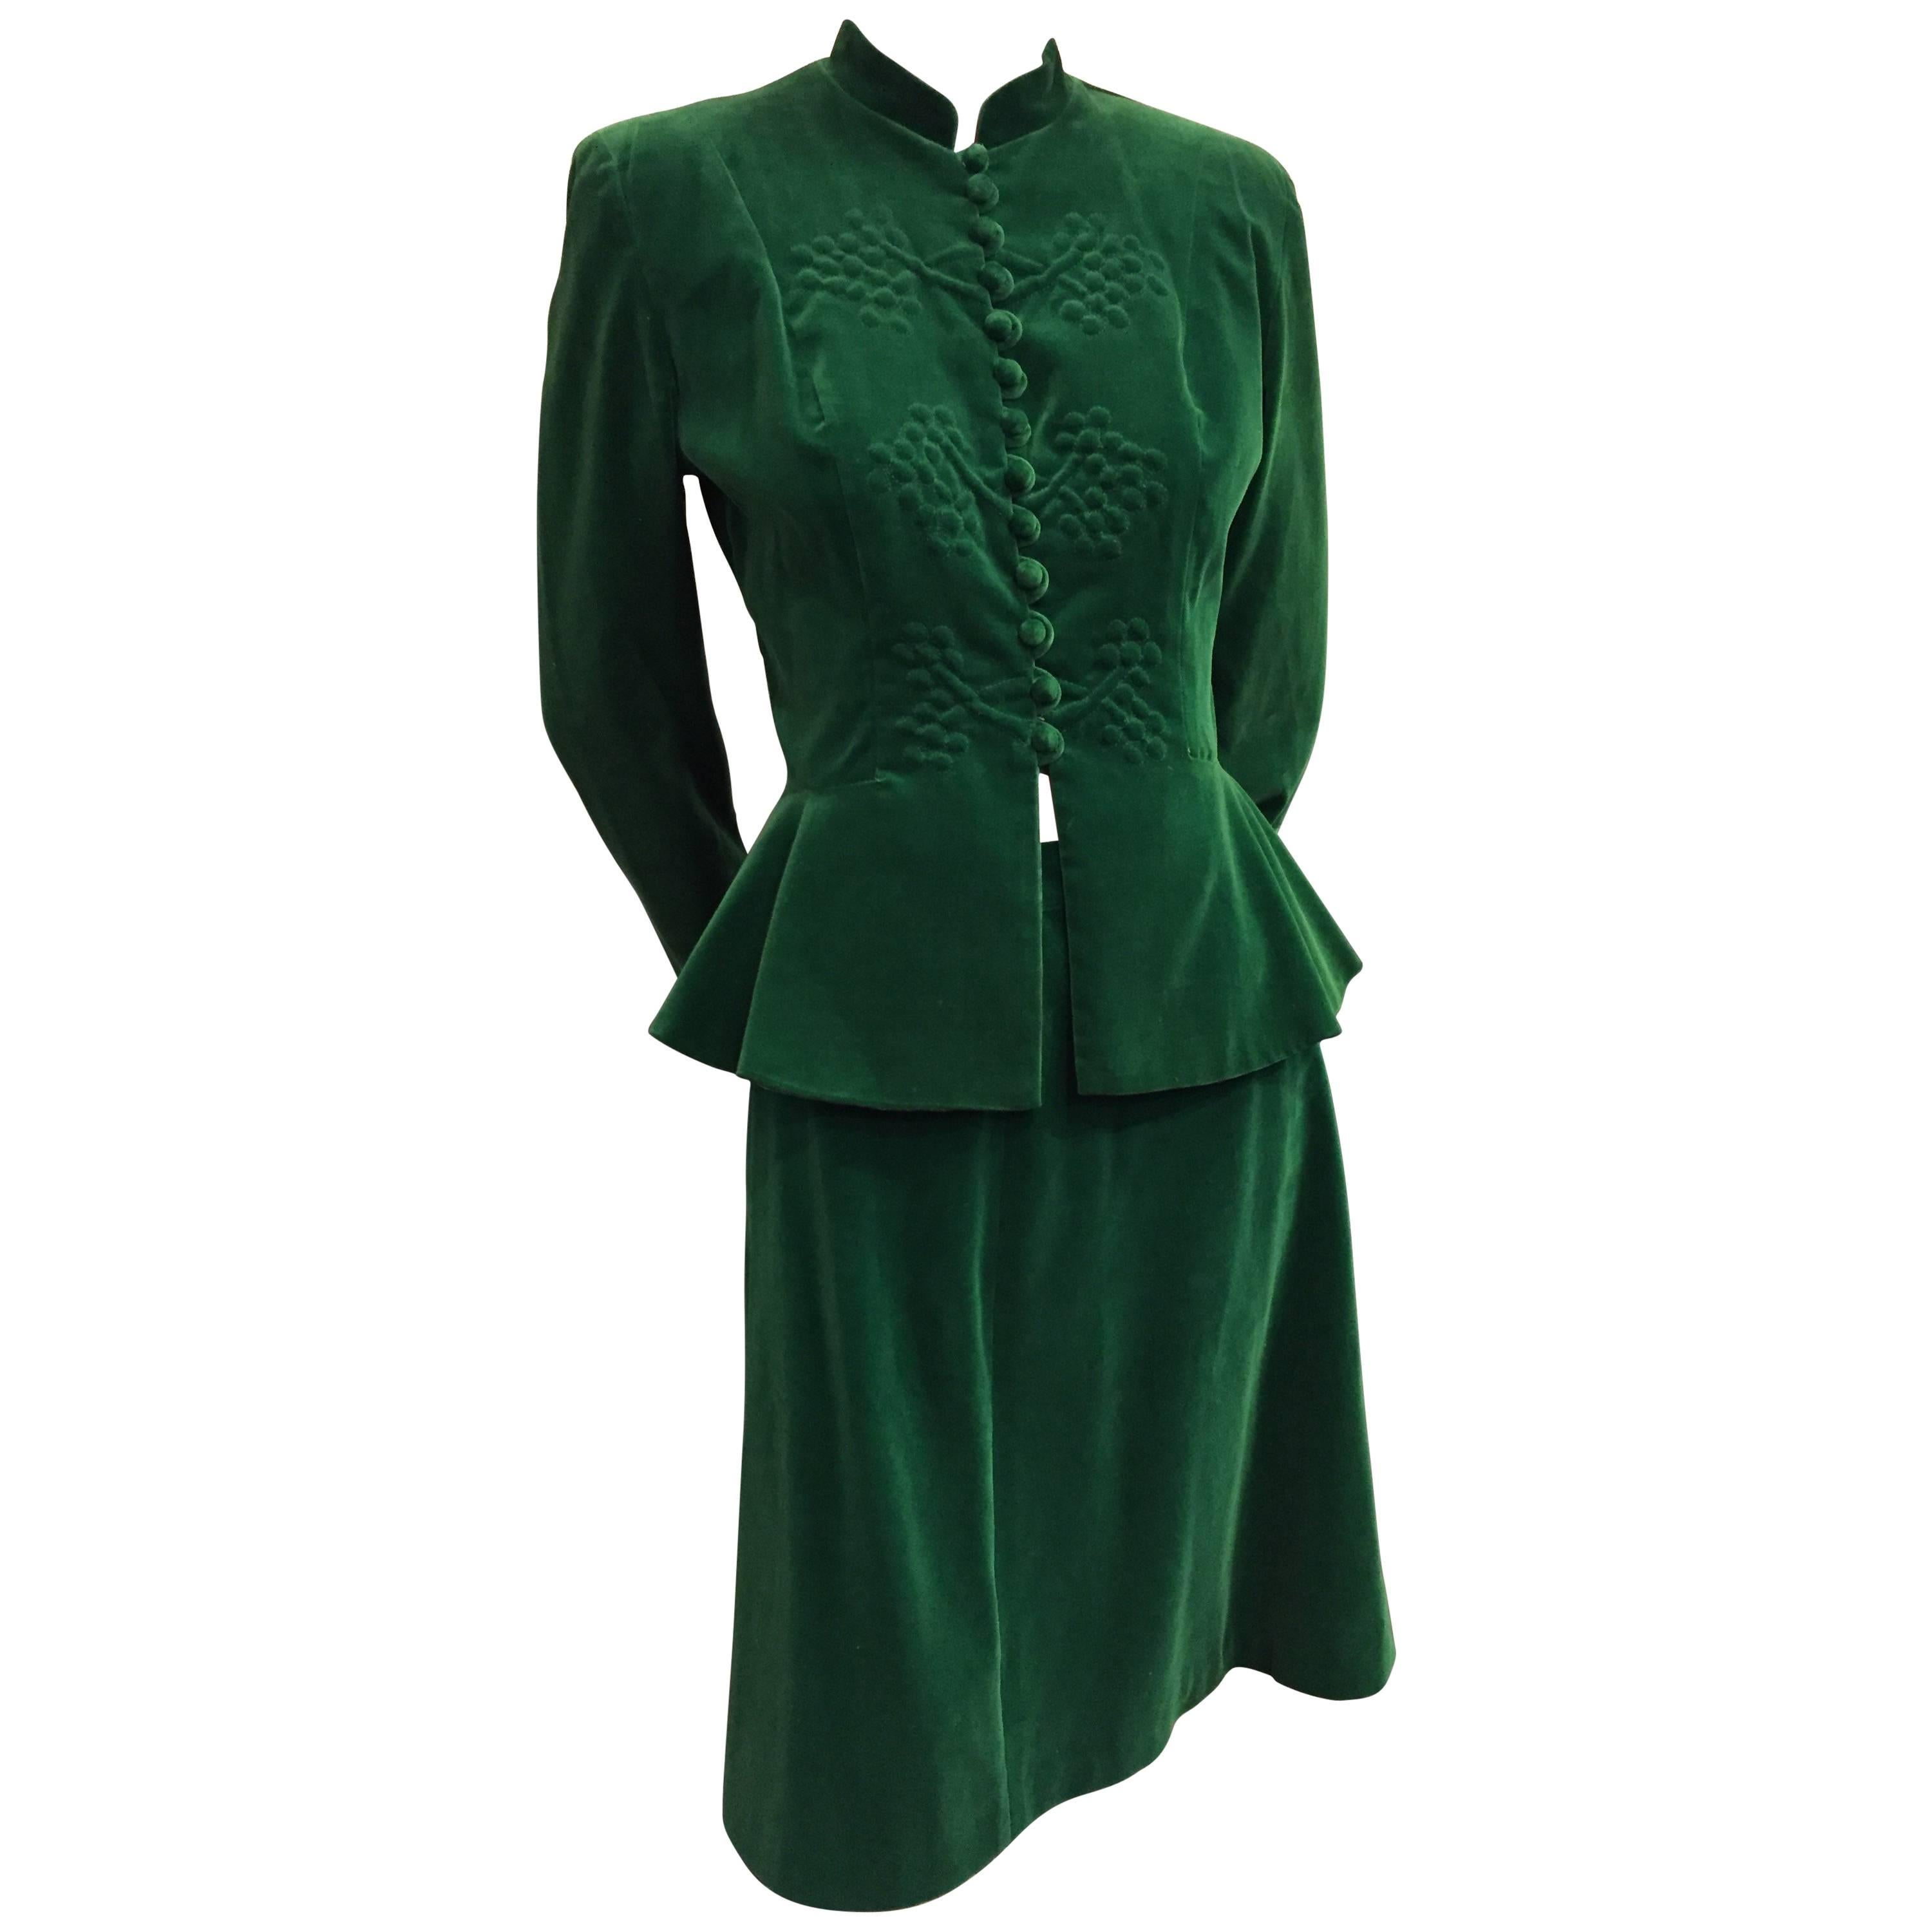 1940s Emerald Green Velvet Peplum Suit with Floral Trapunto Work and Flair